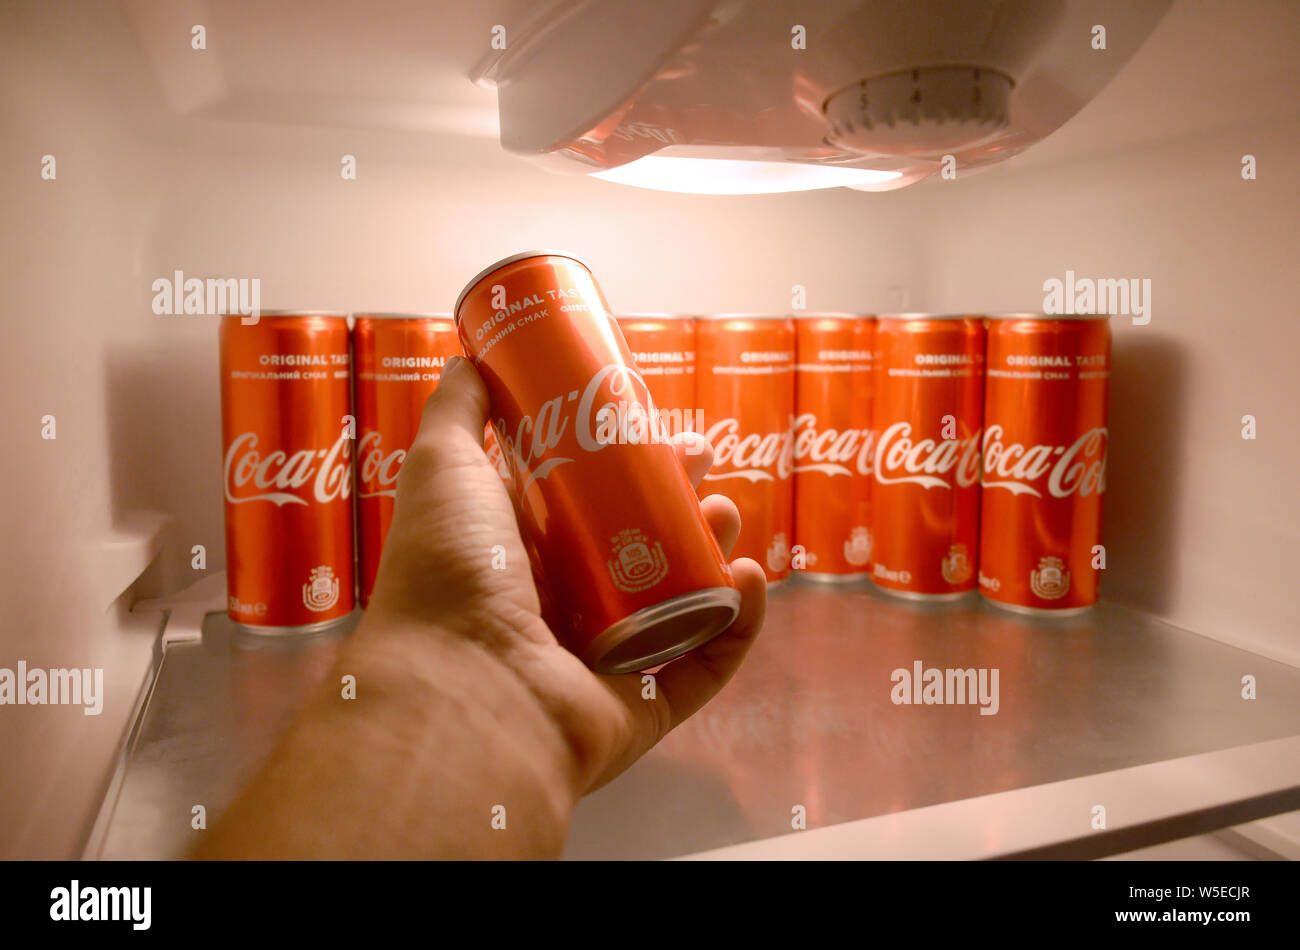 https://c8.alamy.com/comp/W5ECJR/kharkiv-ukraine-july-15-2019-male-hand-shows-coca-cola-red-drink-can-inside-domestic-cooler-fridge-full-of-coke-cans-coca-cola-is-well-known-and-W5ECJR.jpg